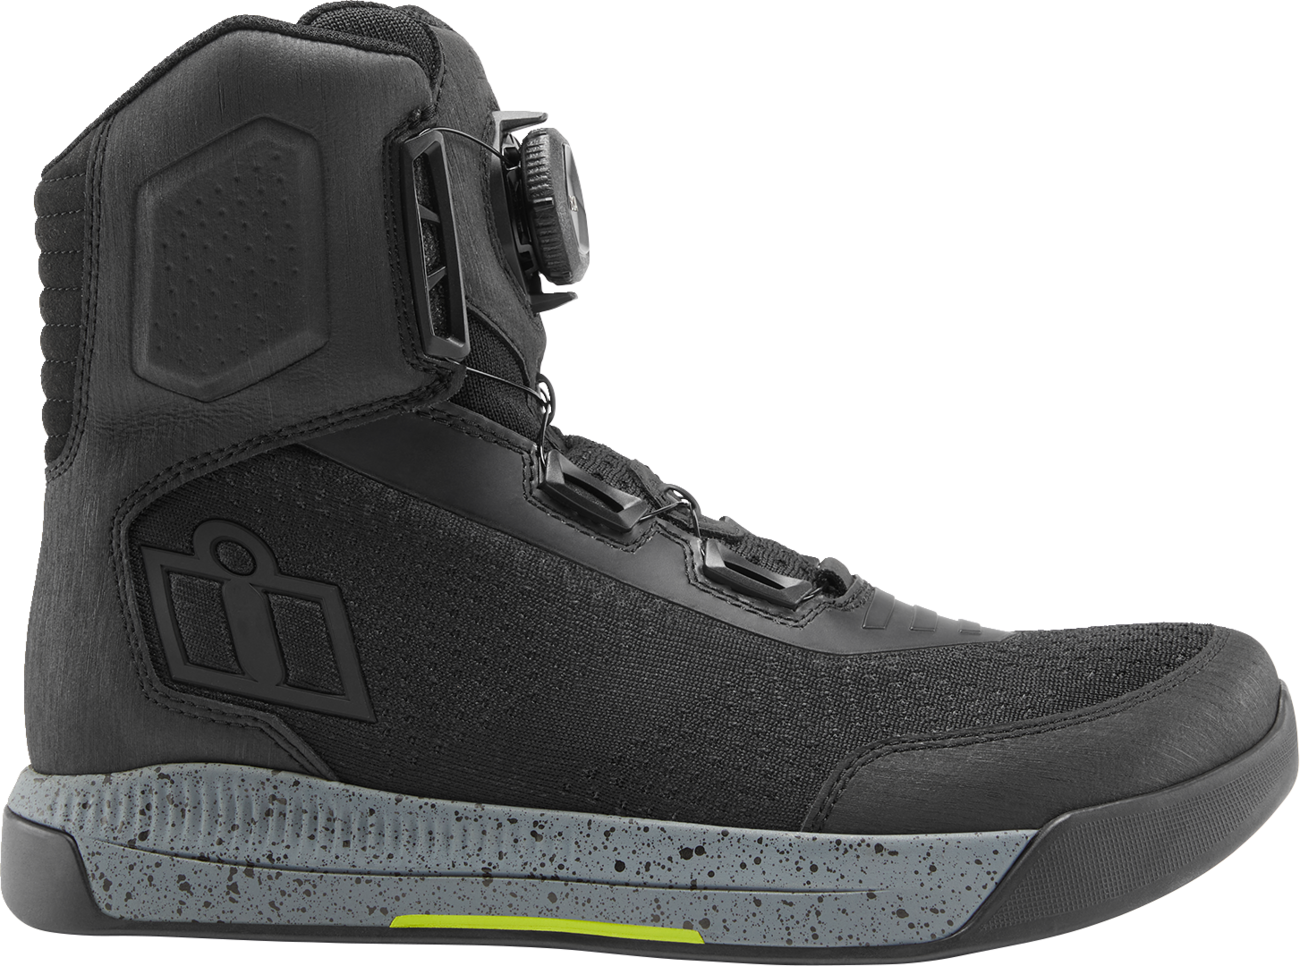 ICON Overlord™ Vented CE Boots - Black - Size 7 3403-1256